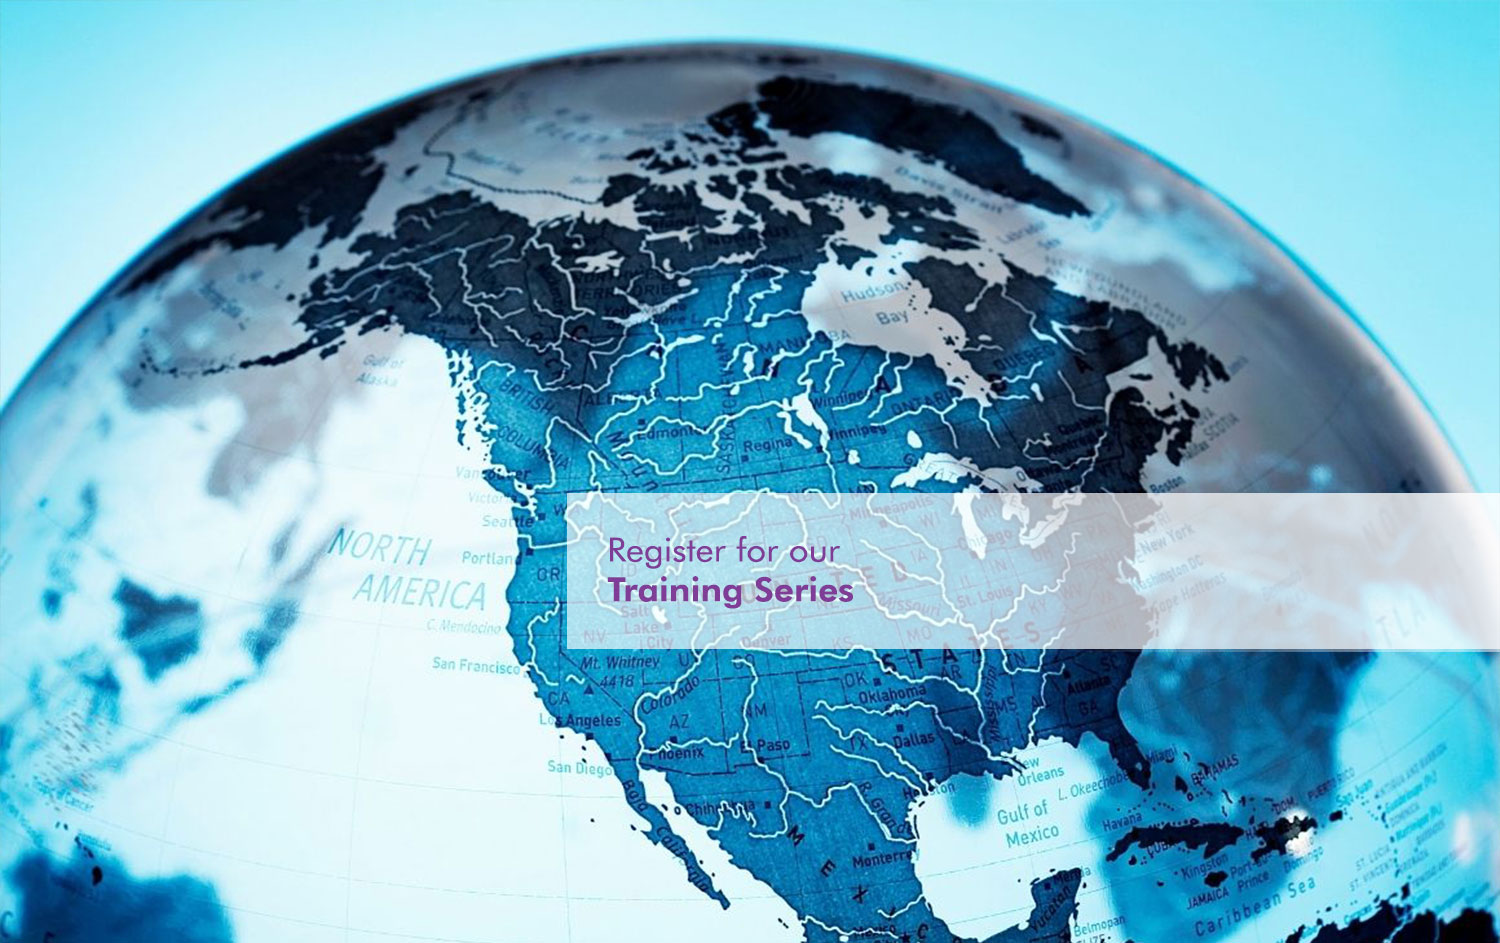 Register for our training series